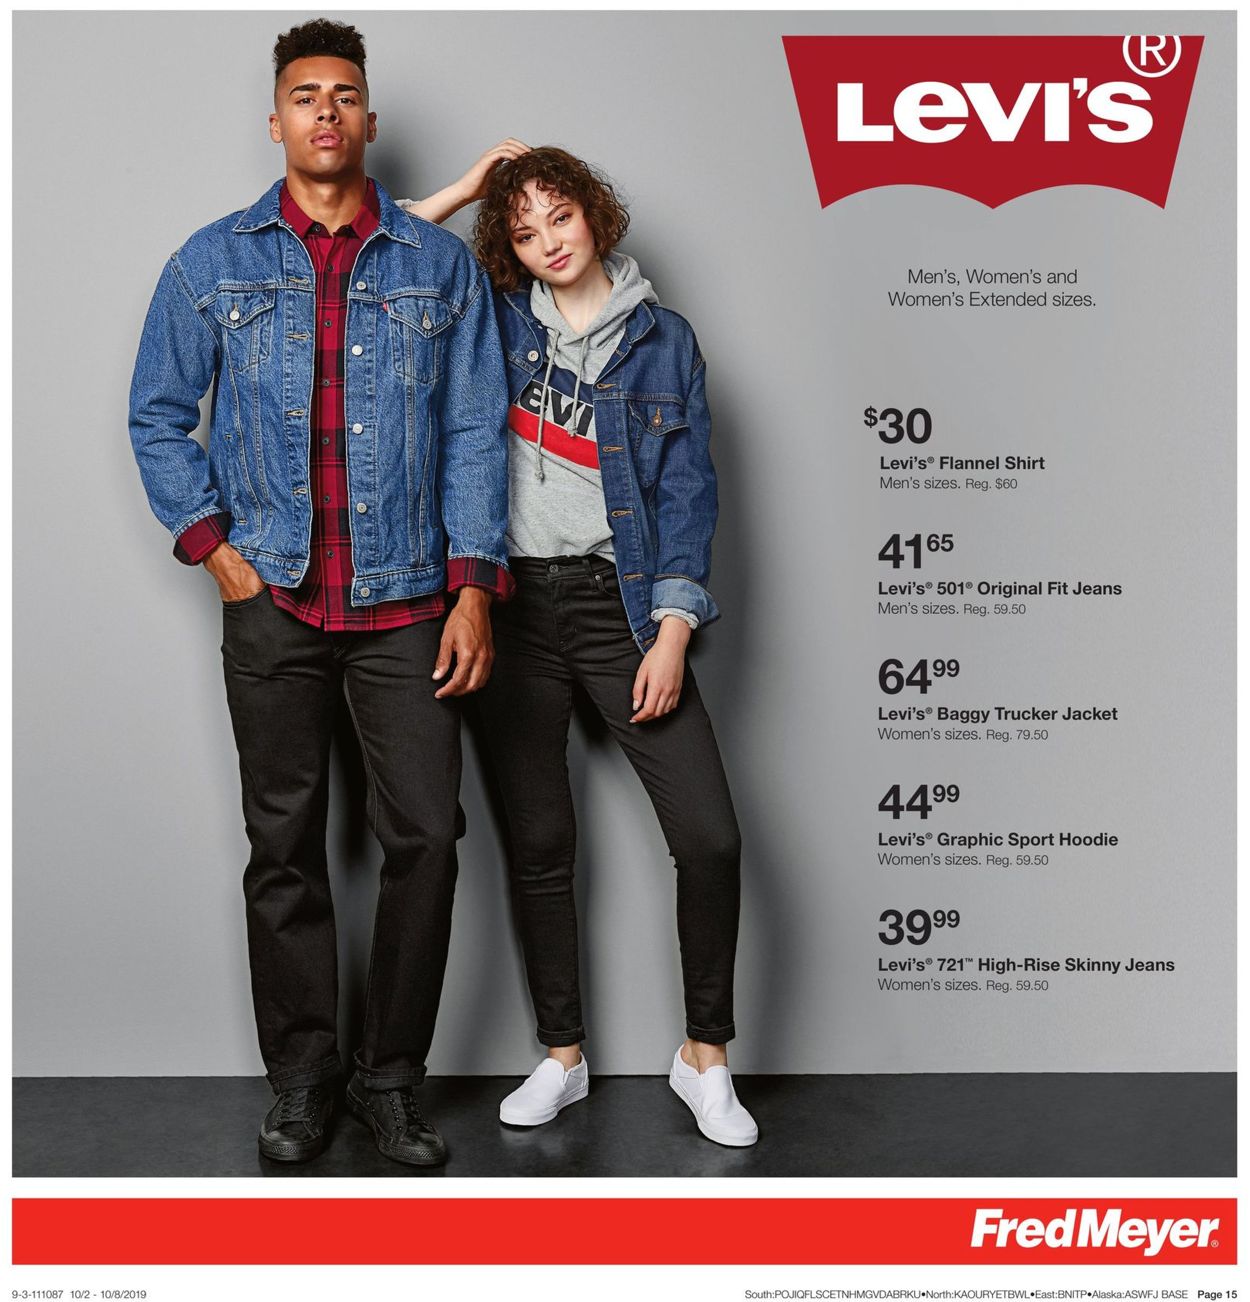 levis at fred meyer